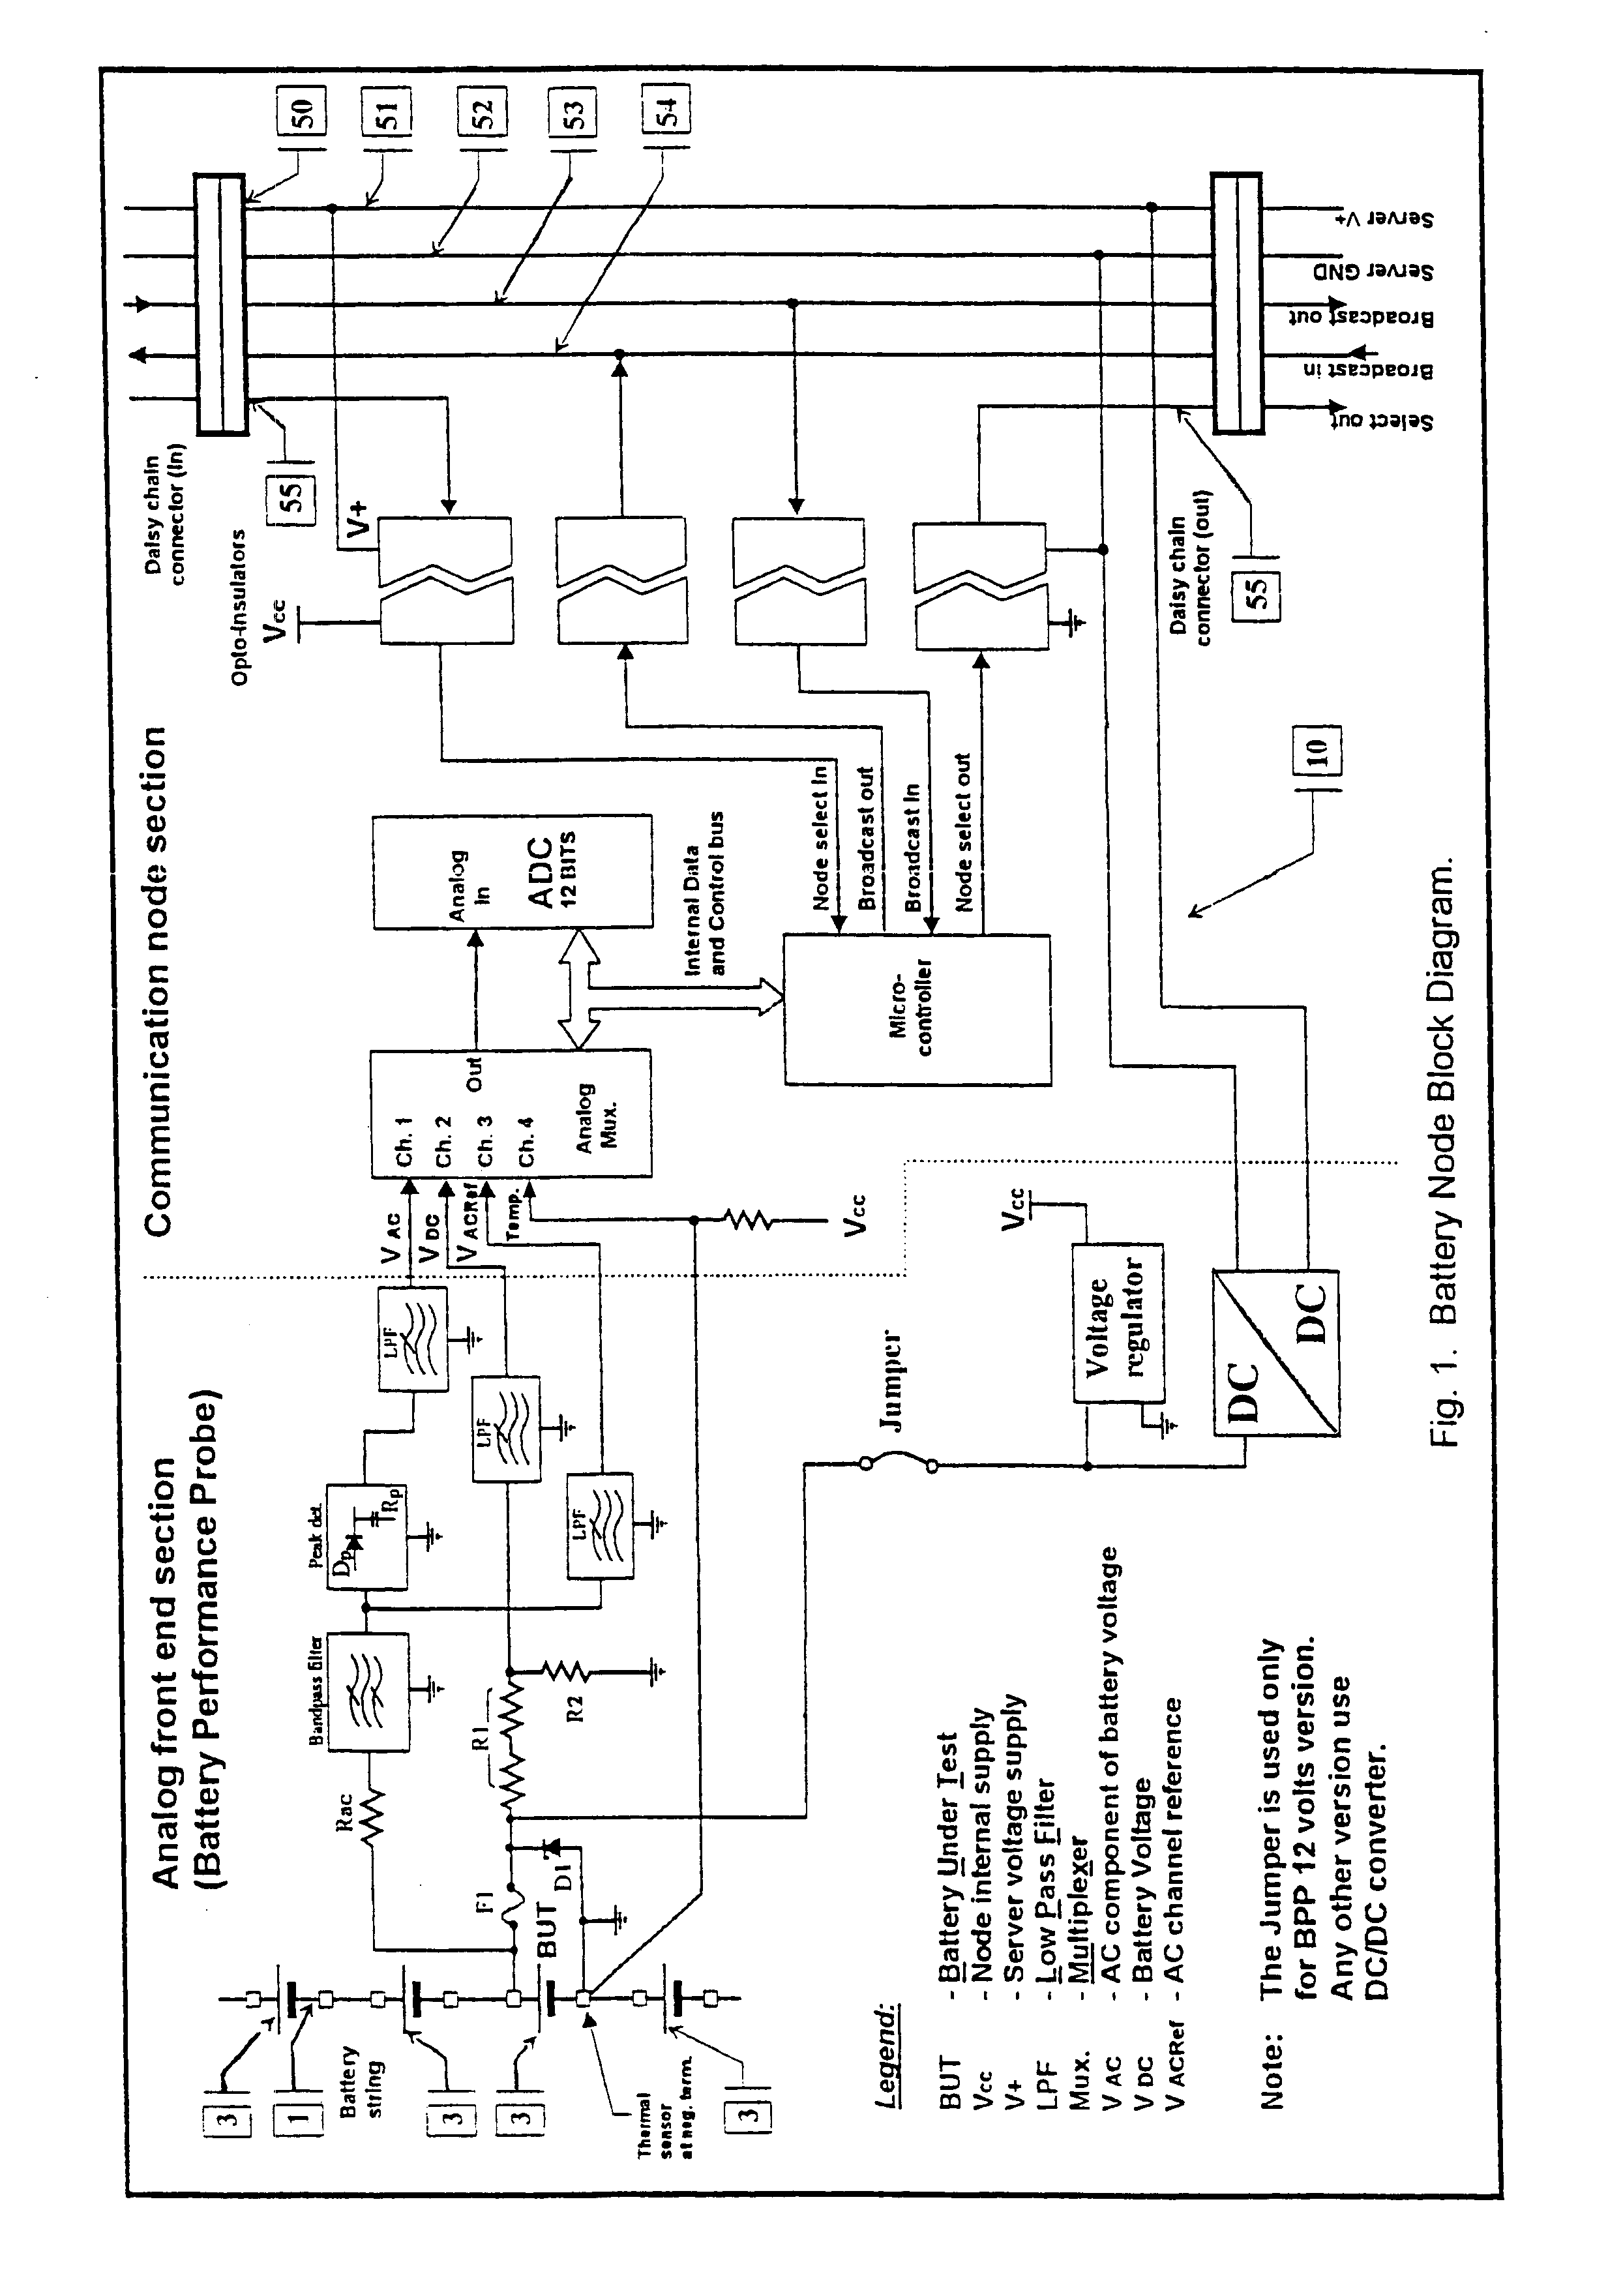 Method and apparatus for the continuous performance monitoring of a lead acid battery system